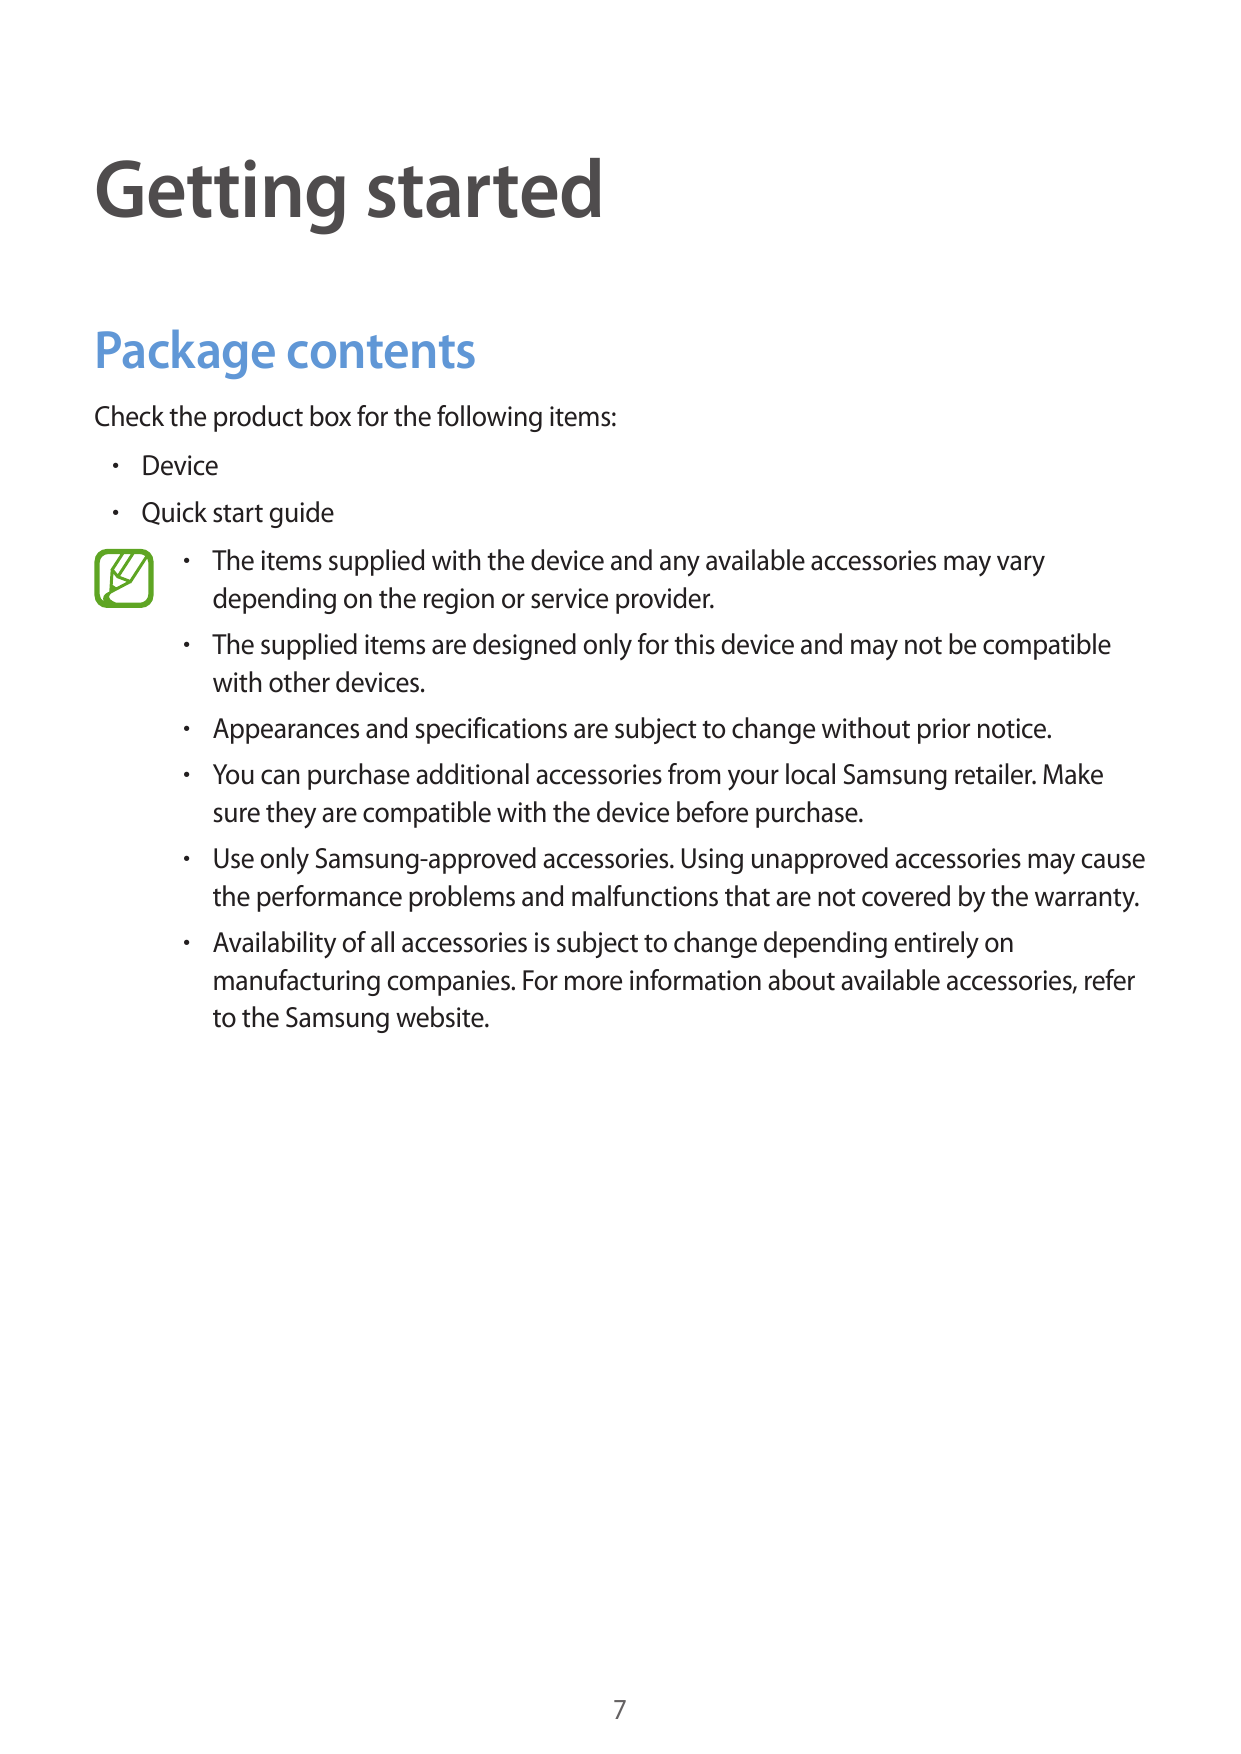 Getting startedPackage contentsCheck the product box for the following items:• Device• Quick start guide• The items supplied wit